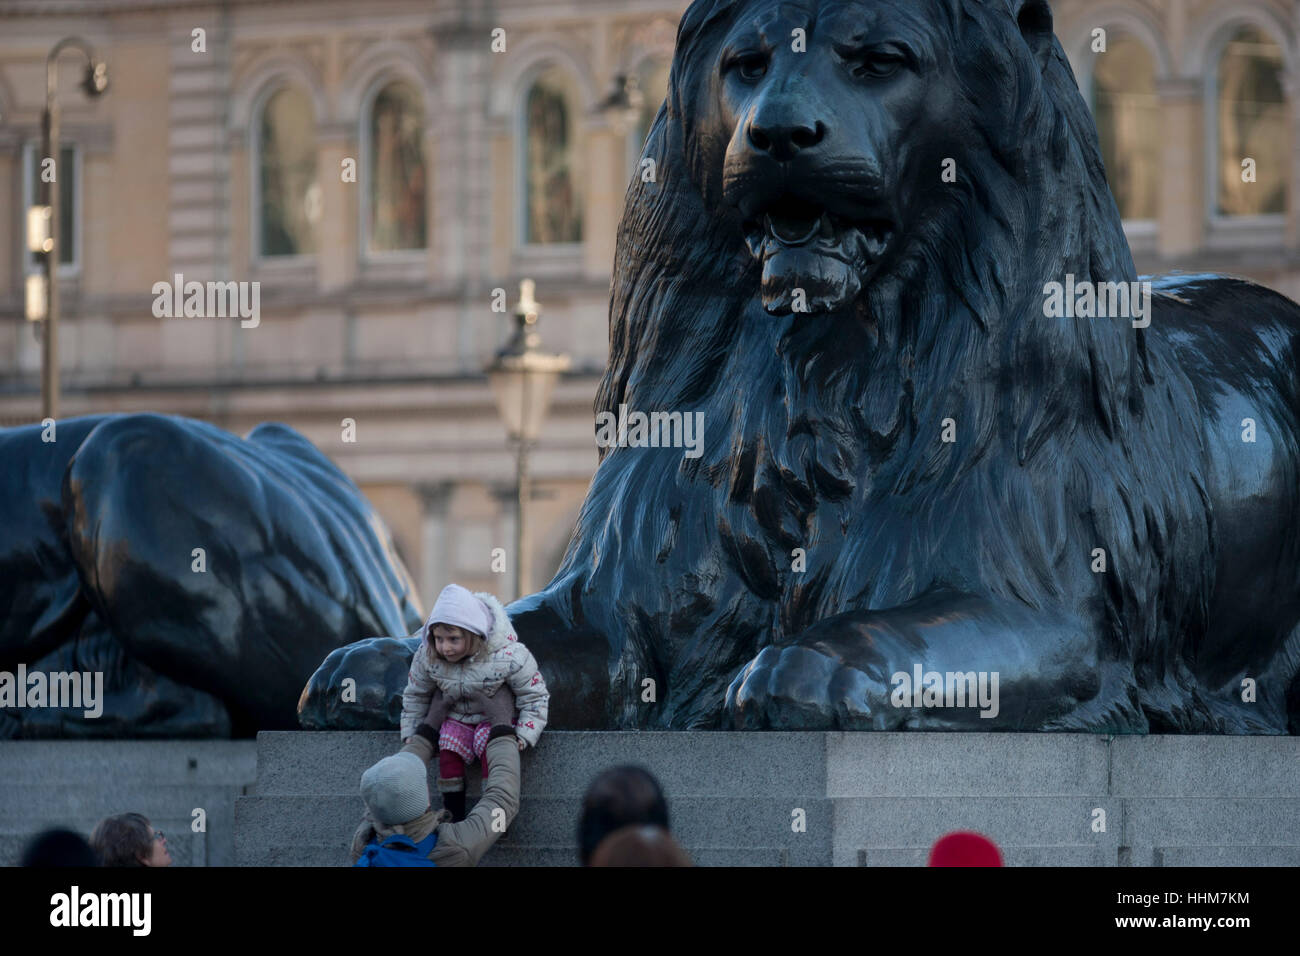 A young girl sits beneath one of the four enormous lion statues at the base of Nelson's column, on 17th January 2017, in Trafalgar Square, London England. The column dedicated to the heroic naval Admiral Lord Nelson is guarded by the four monumental bronze lions sculpted by Sir Edwin Landseer. In recent years there have been numerous falls from the lions resulting in serious injury including the necessity of the air ambulance. Stock Photo